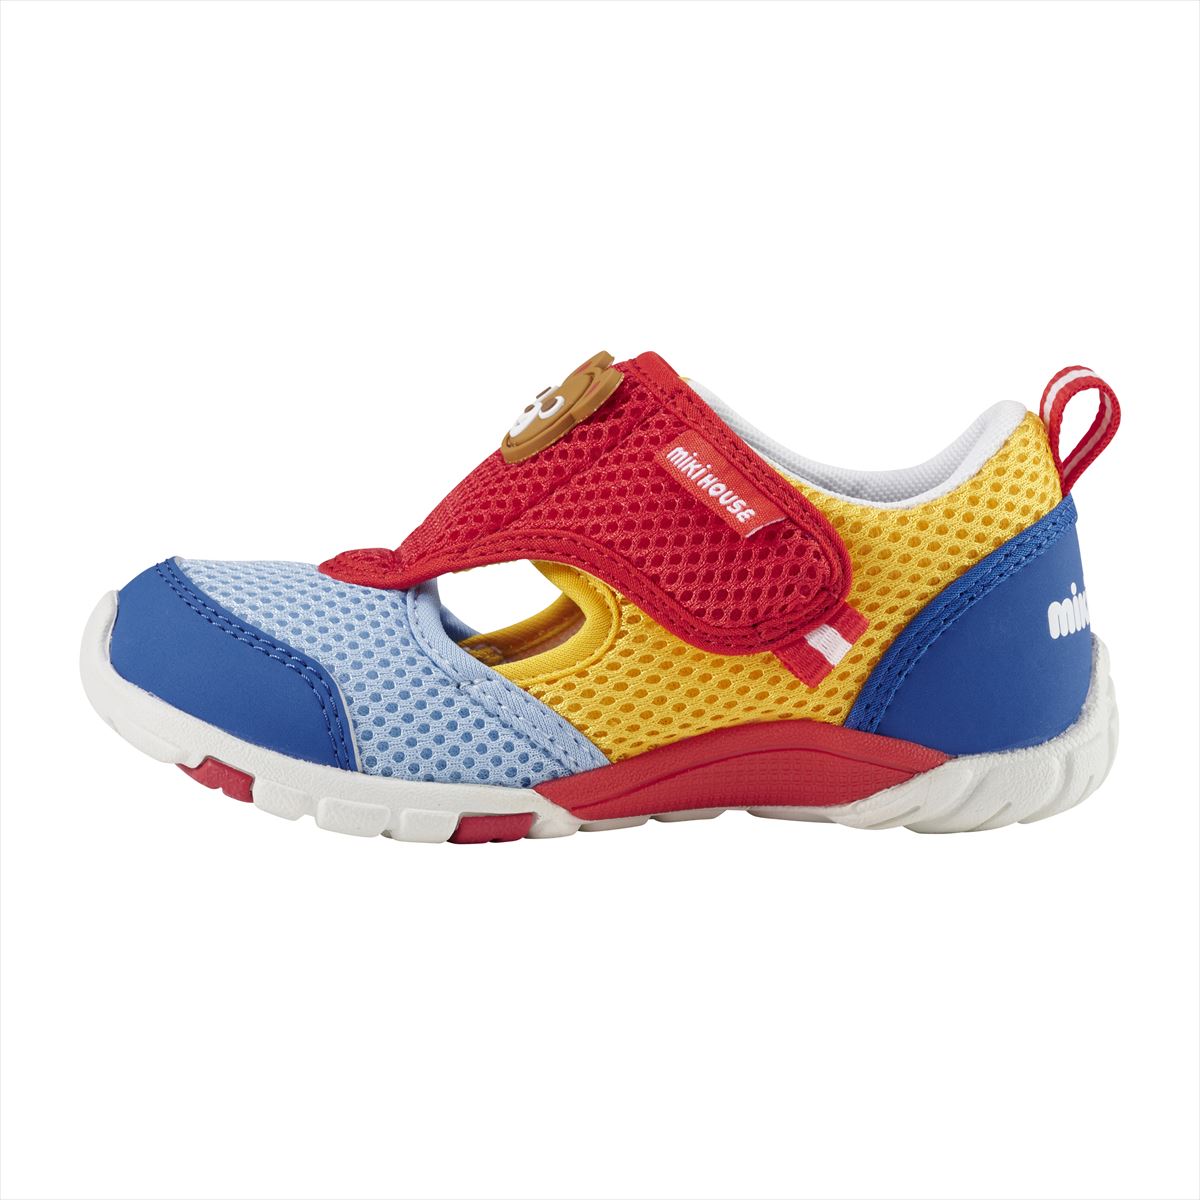 Double Russell Mesh Sneakers for Kids - Fun Flare